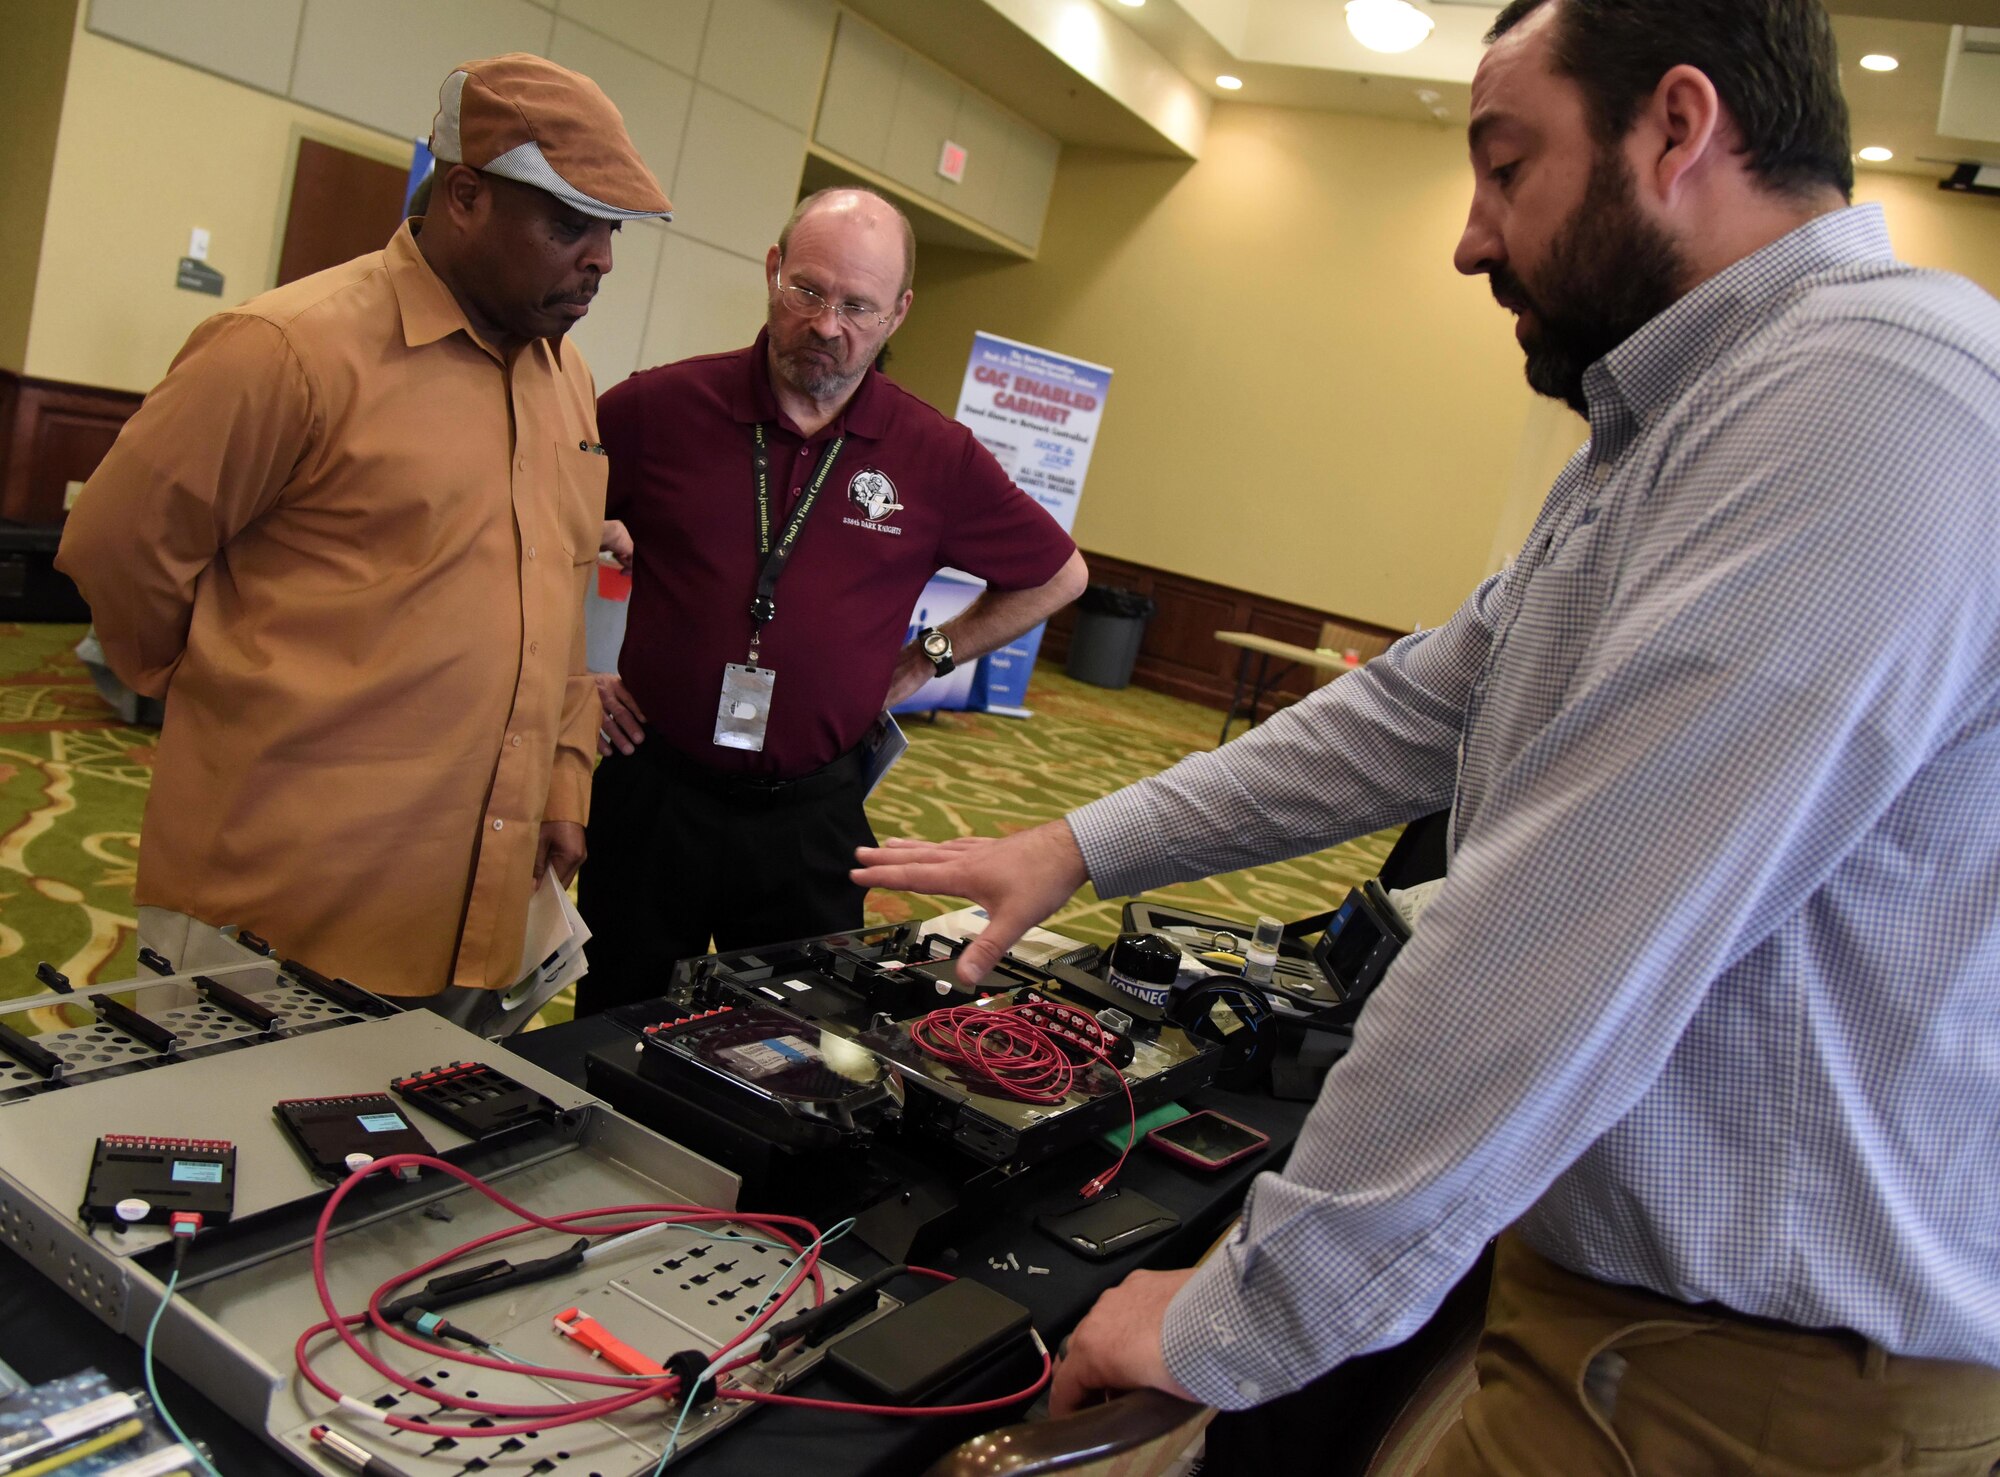 Derek Benson, Corning Optical Communications LLC sales engineer, provides an equipment brief to William Scott, 338th Training Squadron instructor supervisor, and Michael Clark, 338th TRS resource advisor, during the Annual Keesler Air Force Base Tech Expo inside the Bay Breeze Event Center at Keesler Air Force Base, Mississippi, Feb. 5, 2019. The expo was hosted by the 81st Communications Squadron and was free to all Defense Department, government and contractor personnel with base access. U.S. Air Force Maj. Jon Drummond, 81st CS commander, said events like this allows us to see the local vendors' newest technologies and find opportunities to branch that technology with Keesler's training mission. The event was held to introduce military members to the latest in technological advancements to bolster the Air Force's capabilities in national defense. (U.S. Air Force photo by Kemberly Groue)